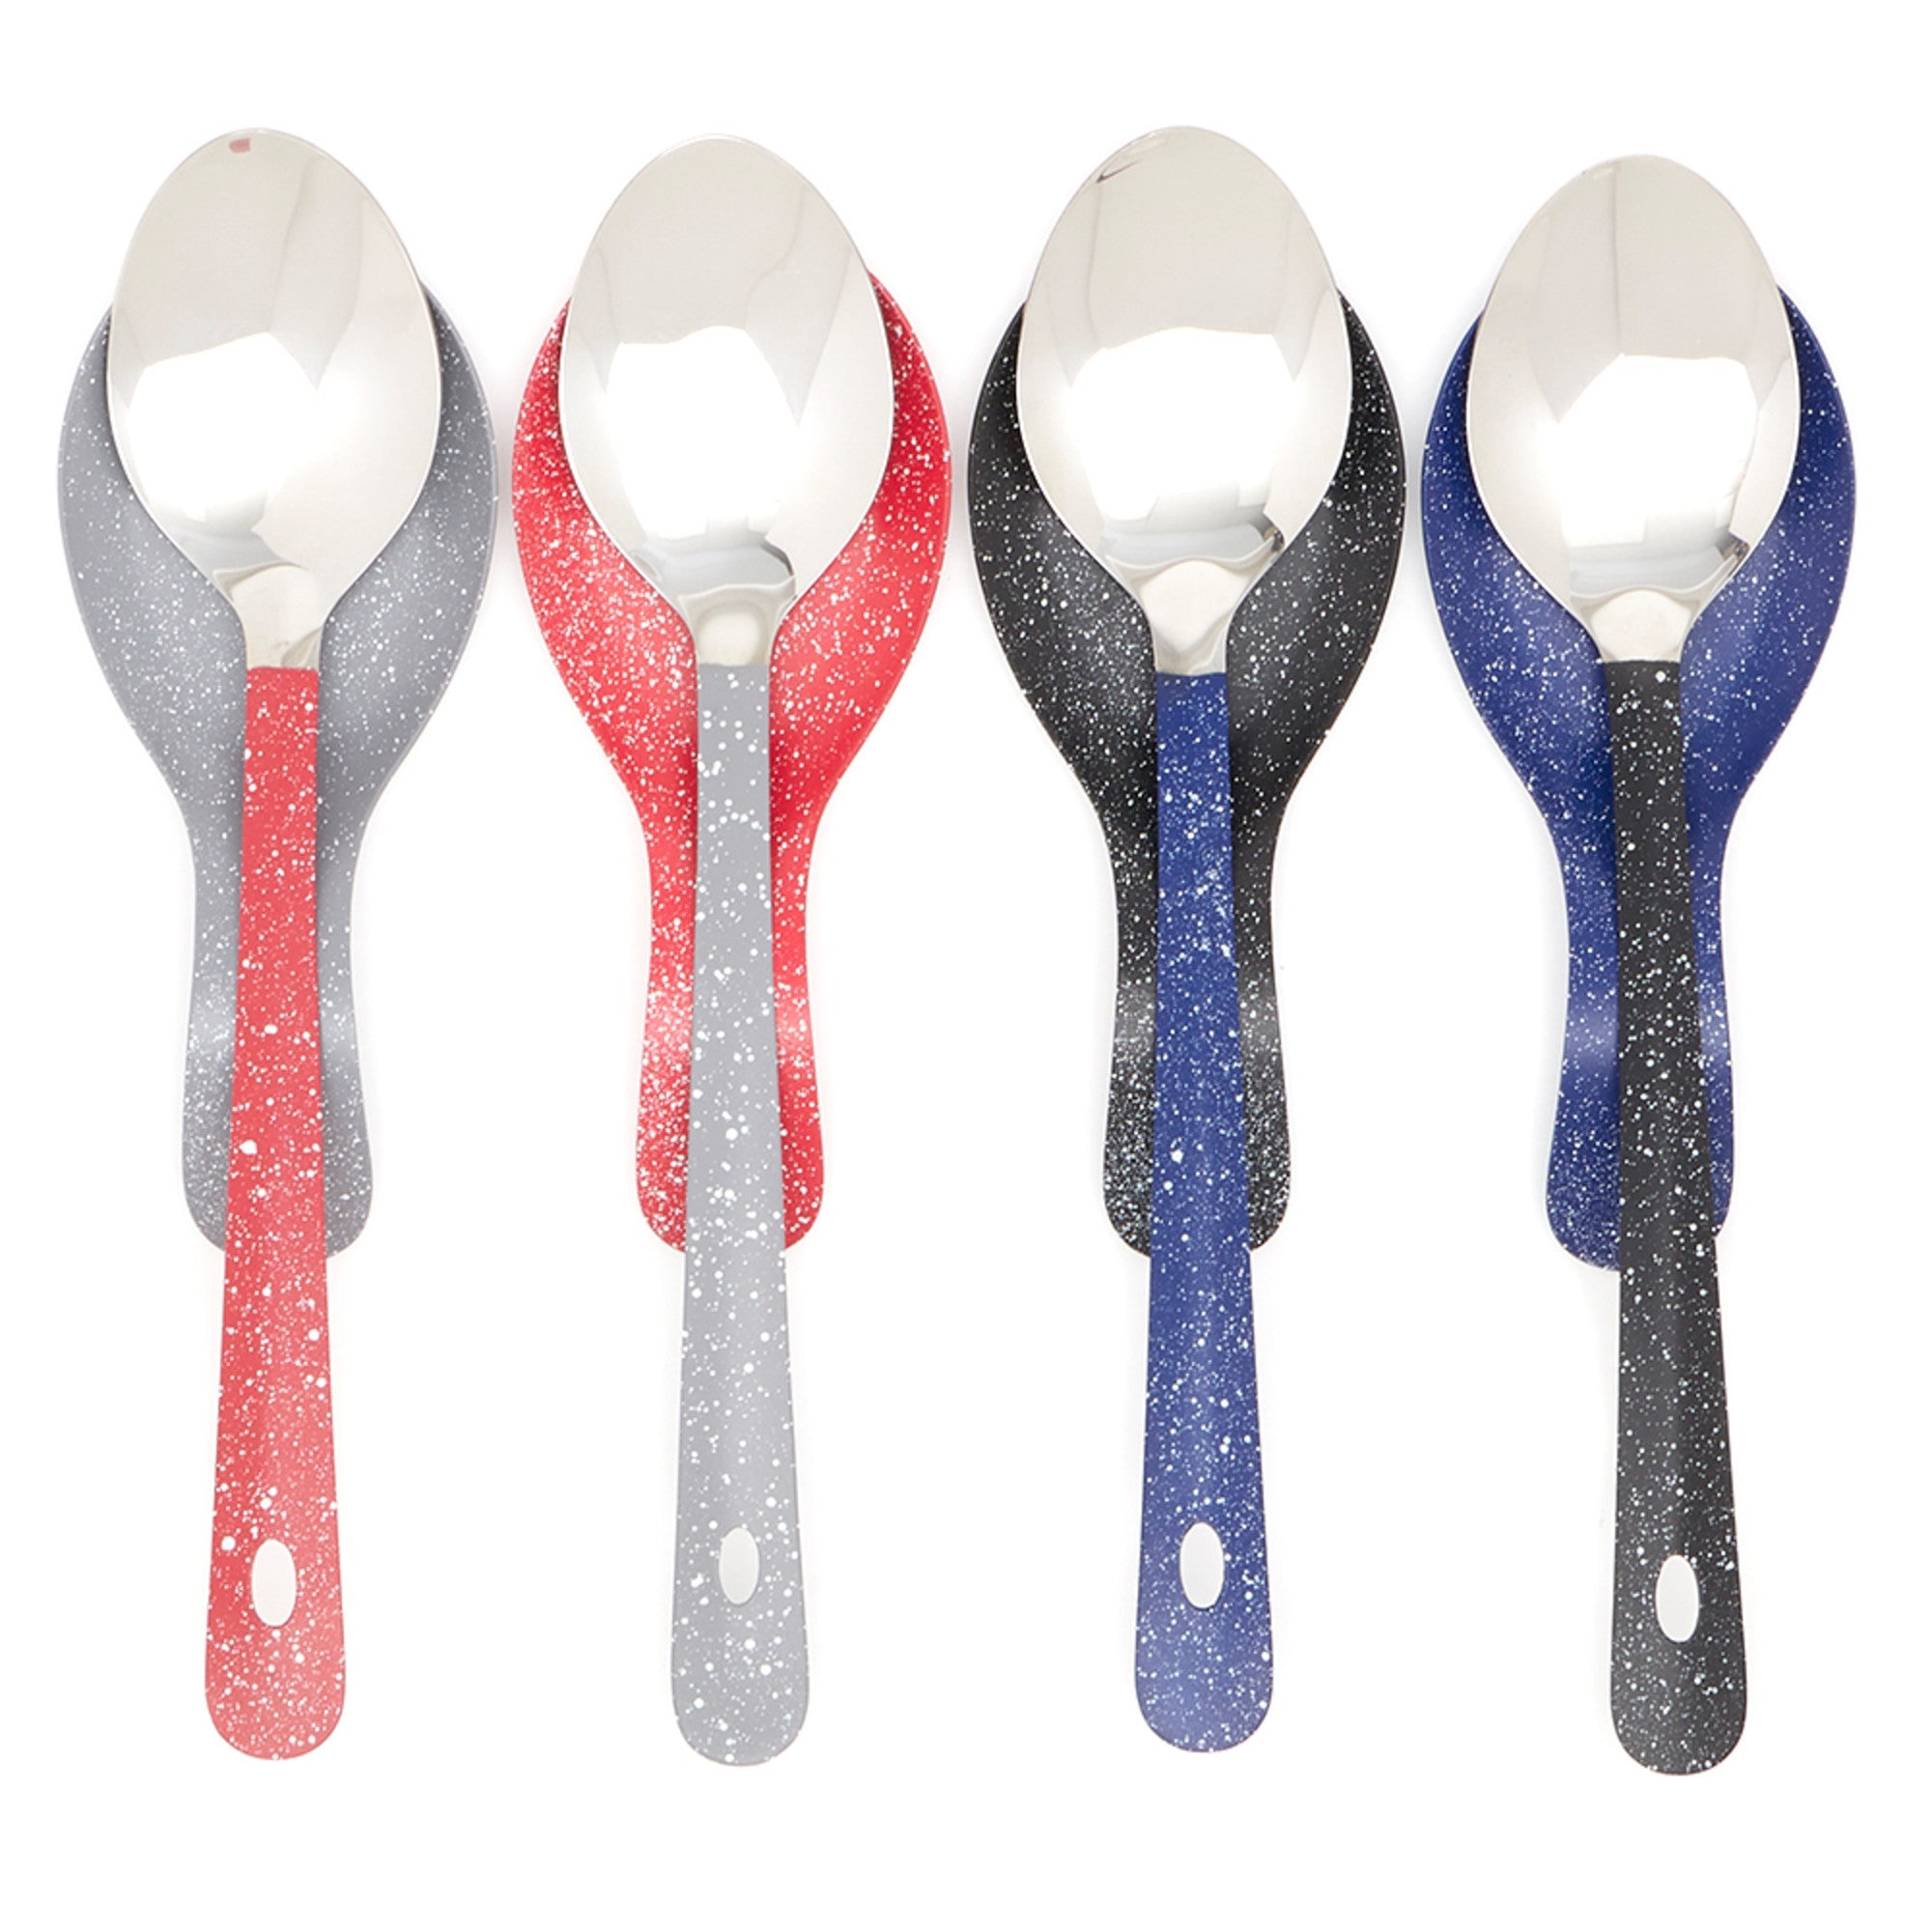 Home Basics Speckled Stainless Steel Serving Spoon - Assorted Colors